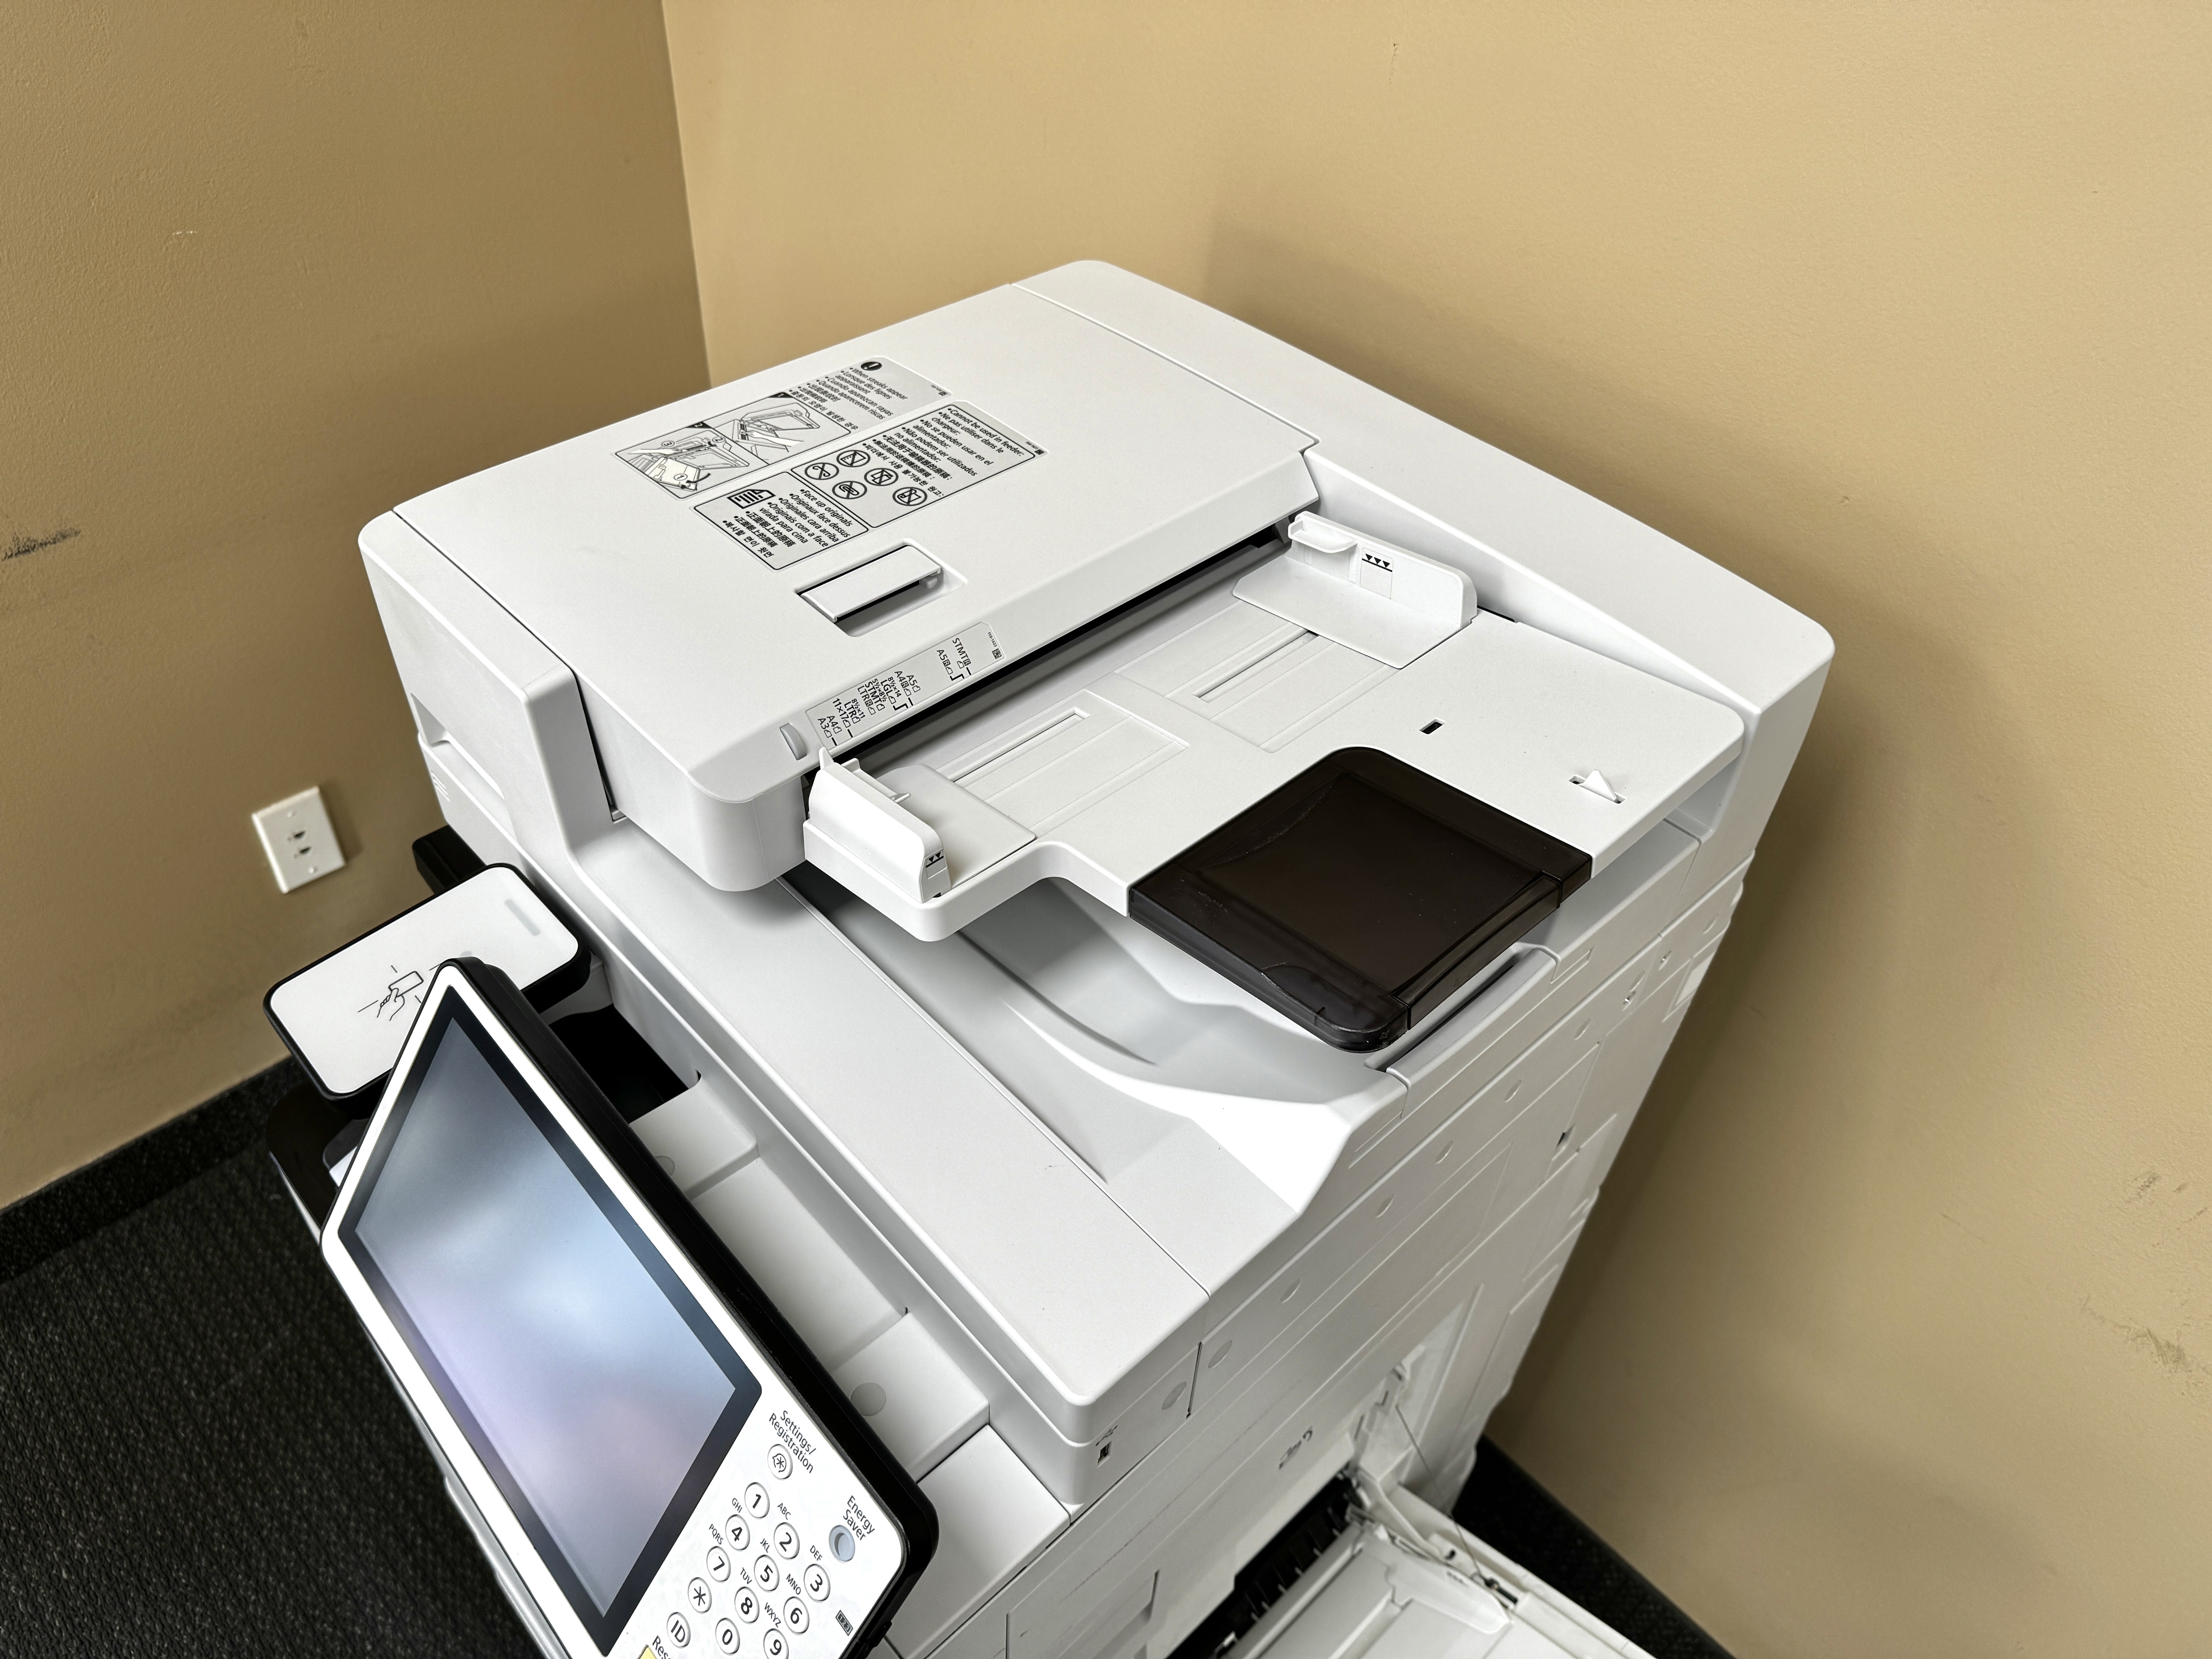 Canon Imagerunner Advance C5740i used copier model used in a IOT copier lease. 